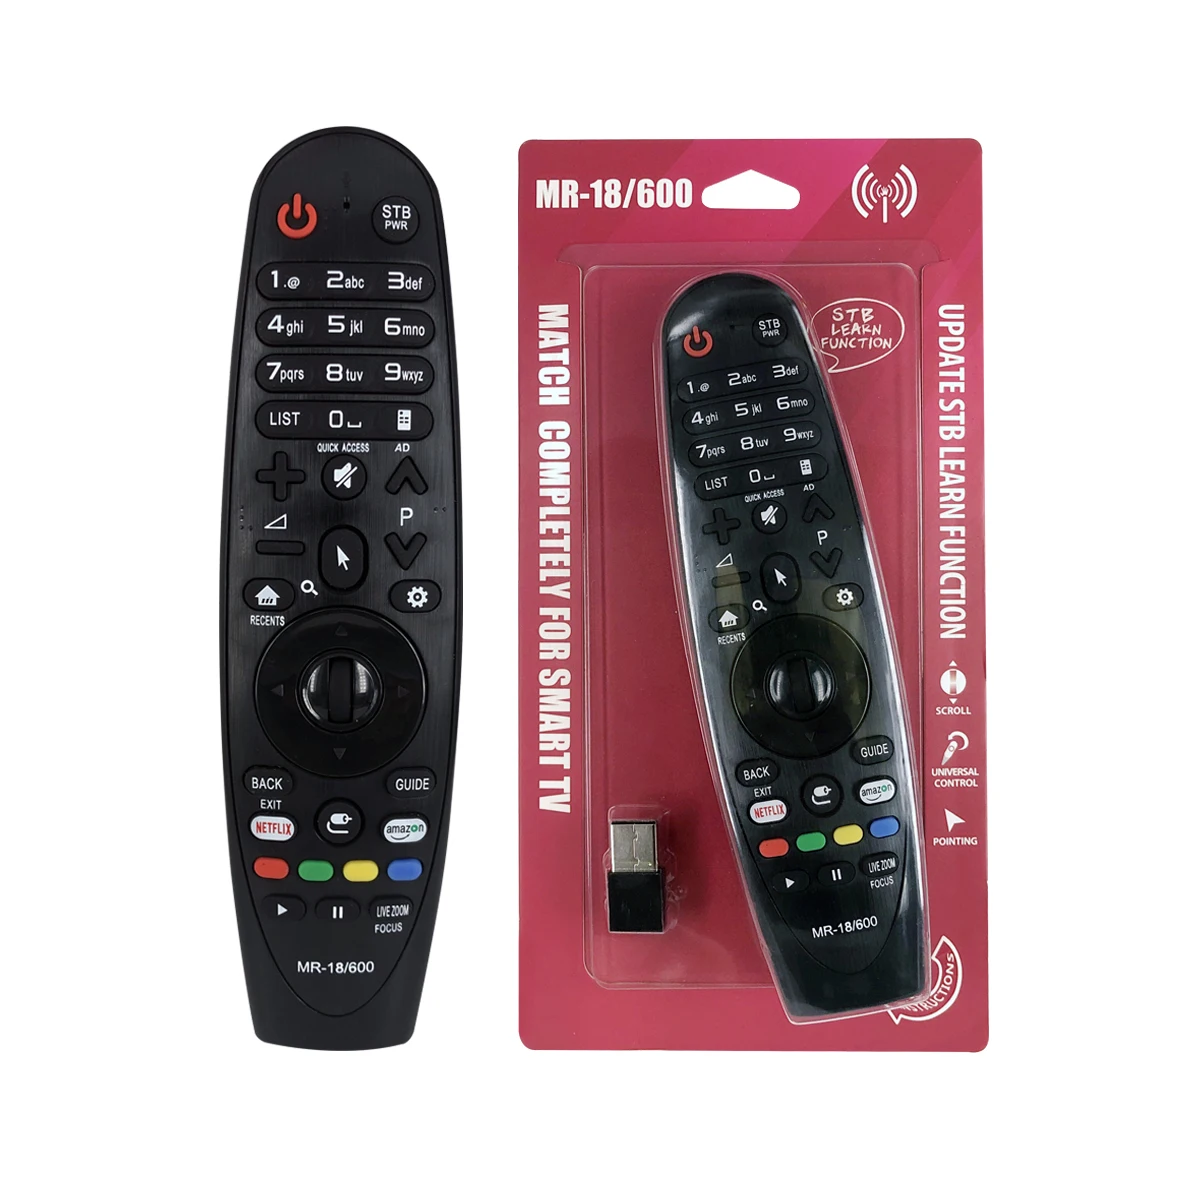 uitlijning zand Oude tijden Mr-18/600 Replacement Remote Controller For Usb Smart Tv Remote For Lg  Smart Tv Control In Wholesale - Buy Controller For Usb,Remote Controller  For Usb For Lg,Smart Tv Remote For Lg Product on